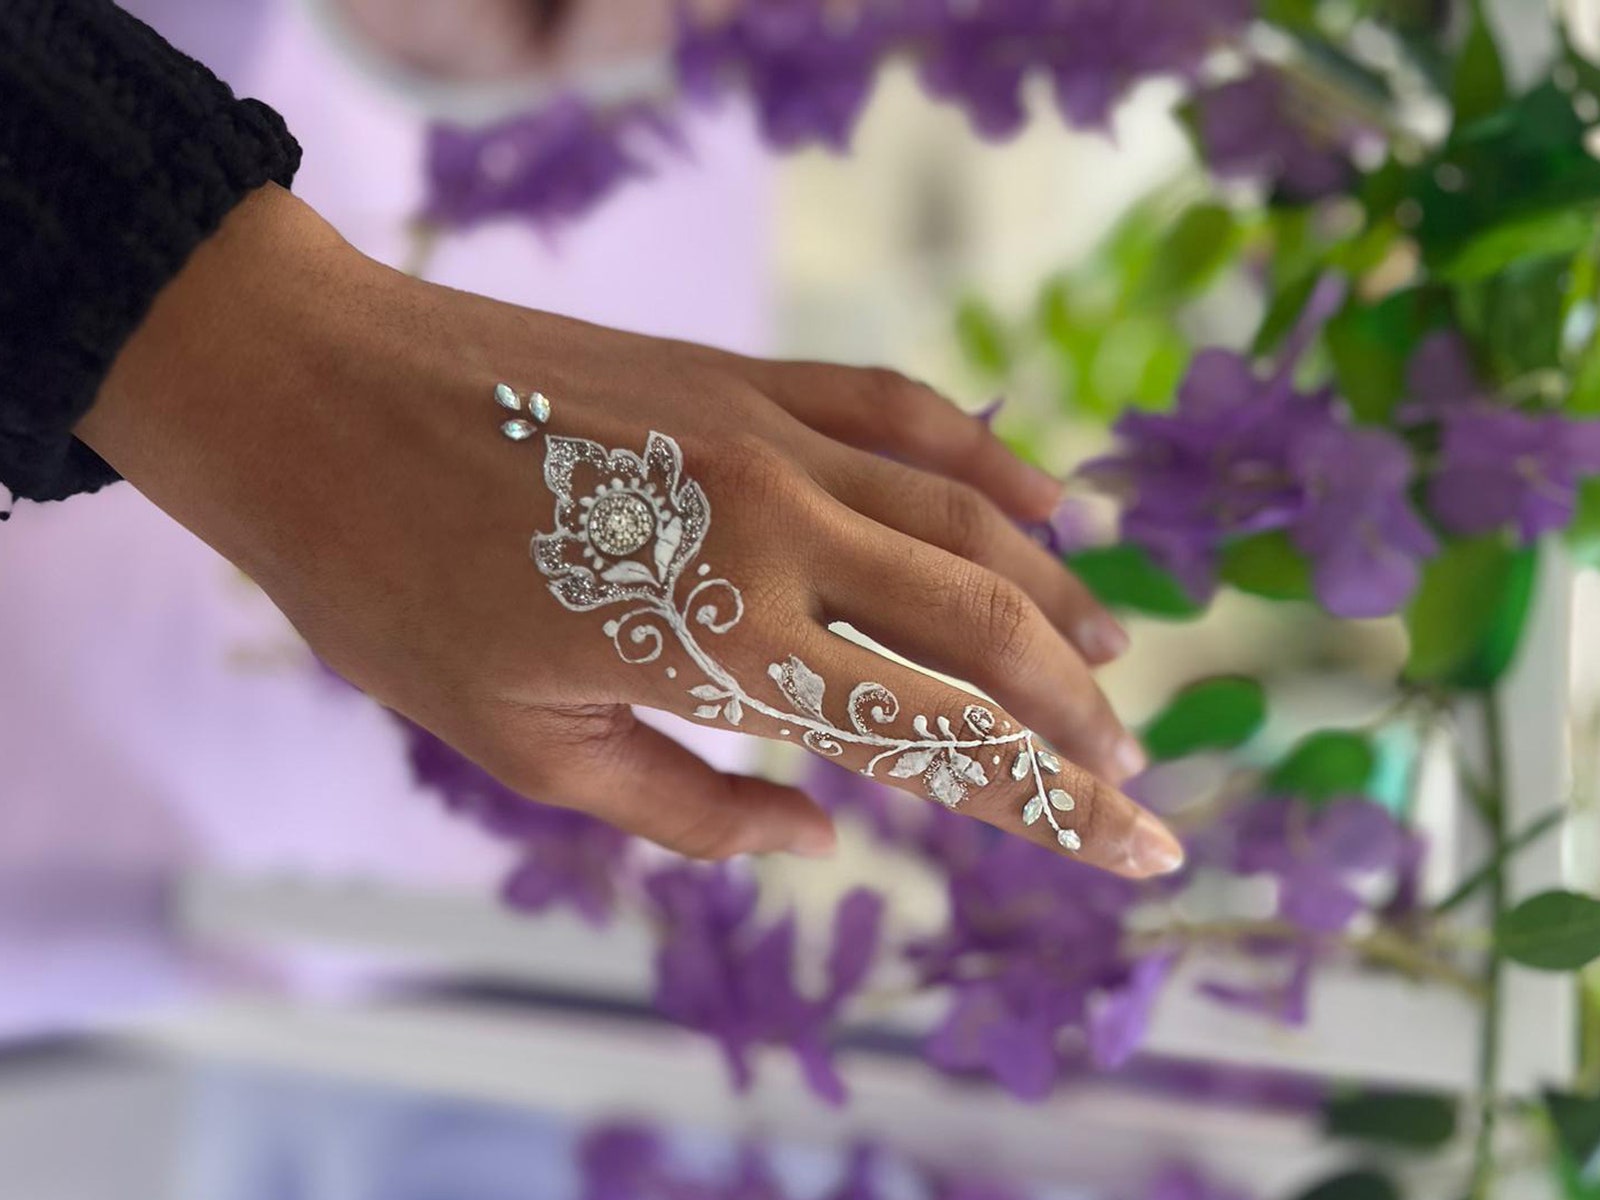 The most beautiful henna designs for Eid, according to celebrity henna artists